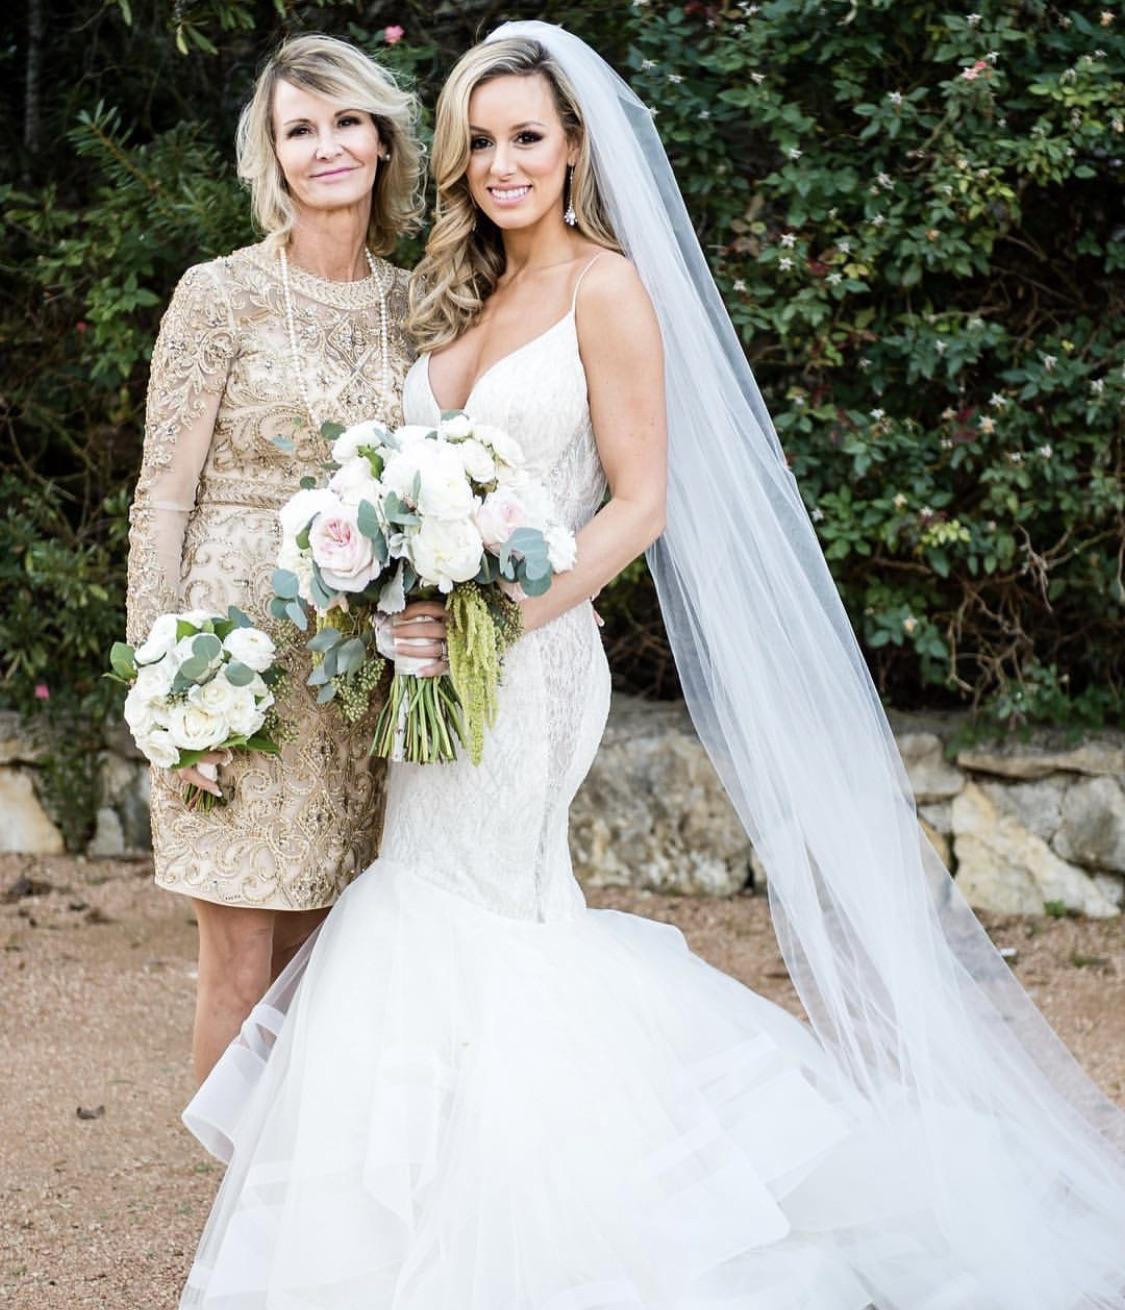 You get to have mom or daughter on her wedding day. Who do you choose?